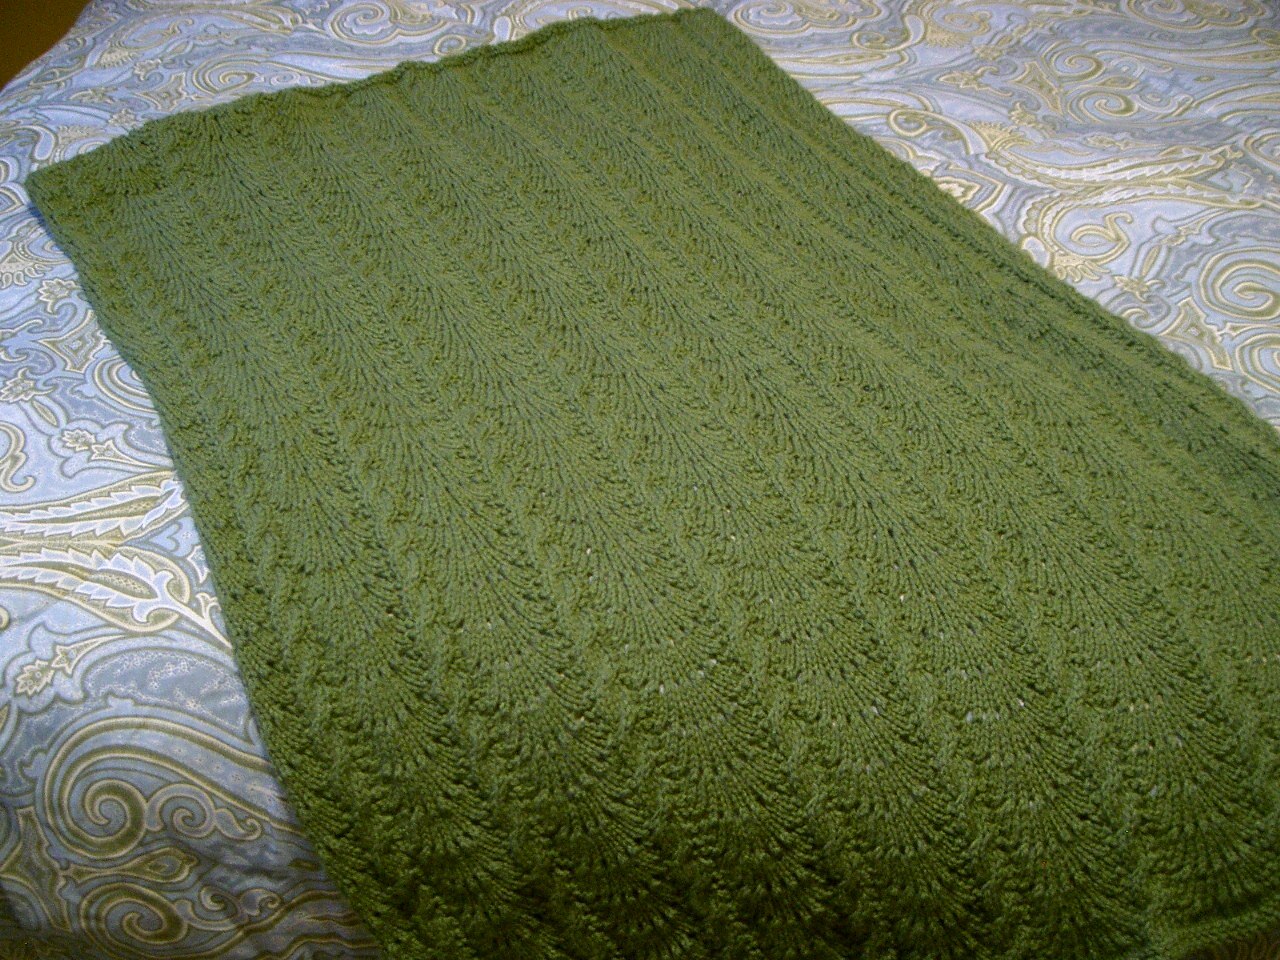 Overview photo of the completed blanket.